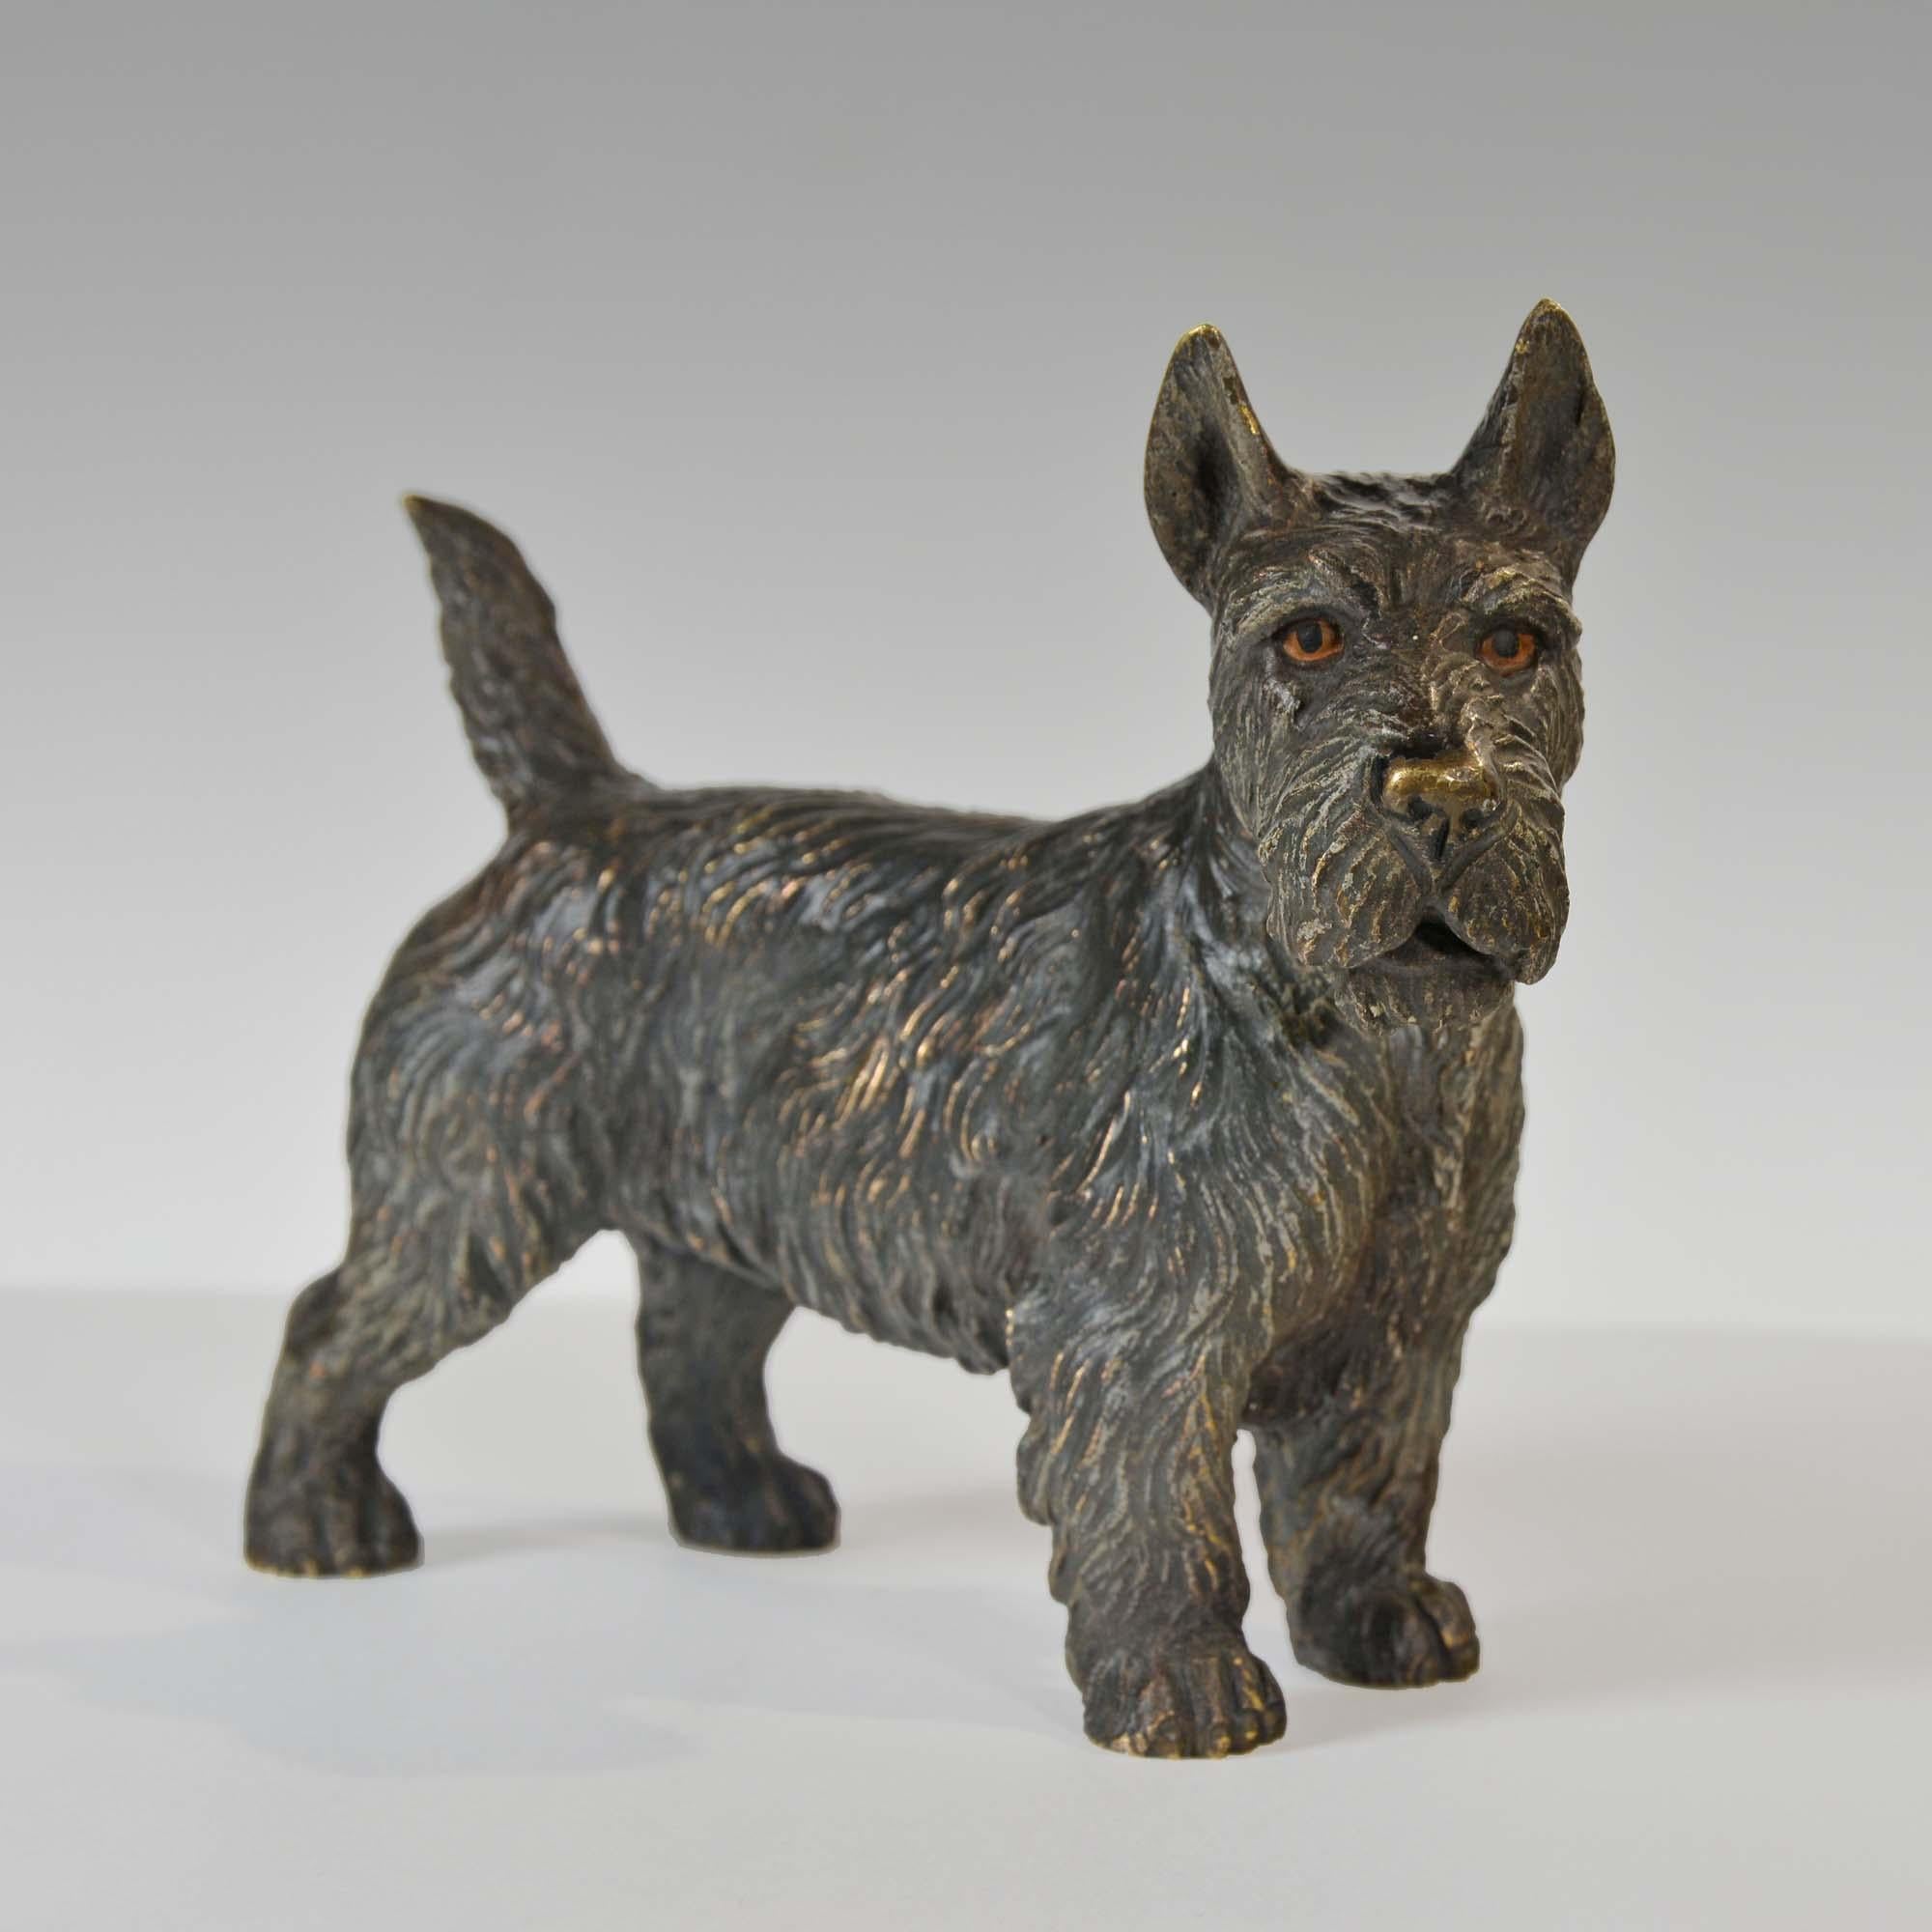 Austrian cold painted bronze of a Scottish Terrier, or 'Scottie Dog'. Fine naturalistic colours and good hand chased surface detail. Stamped 'AUSTRIA'.  A very well preserved example of a cold painted bronze with the characterful face of a Scottie